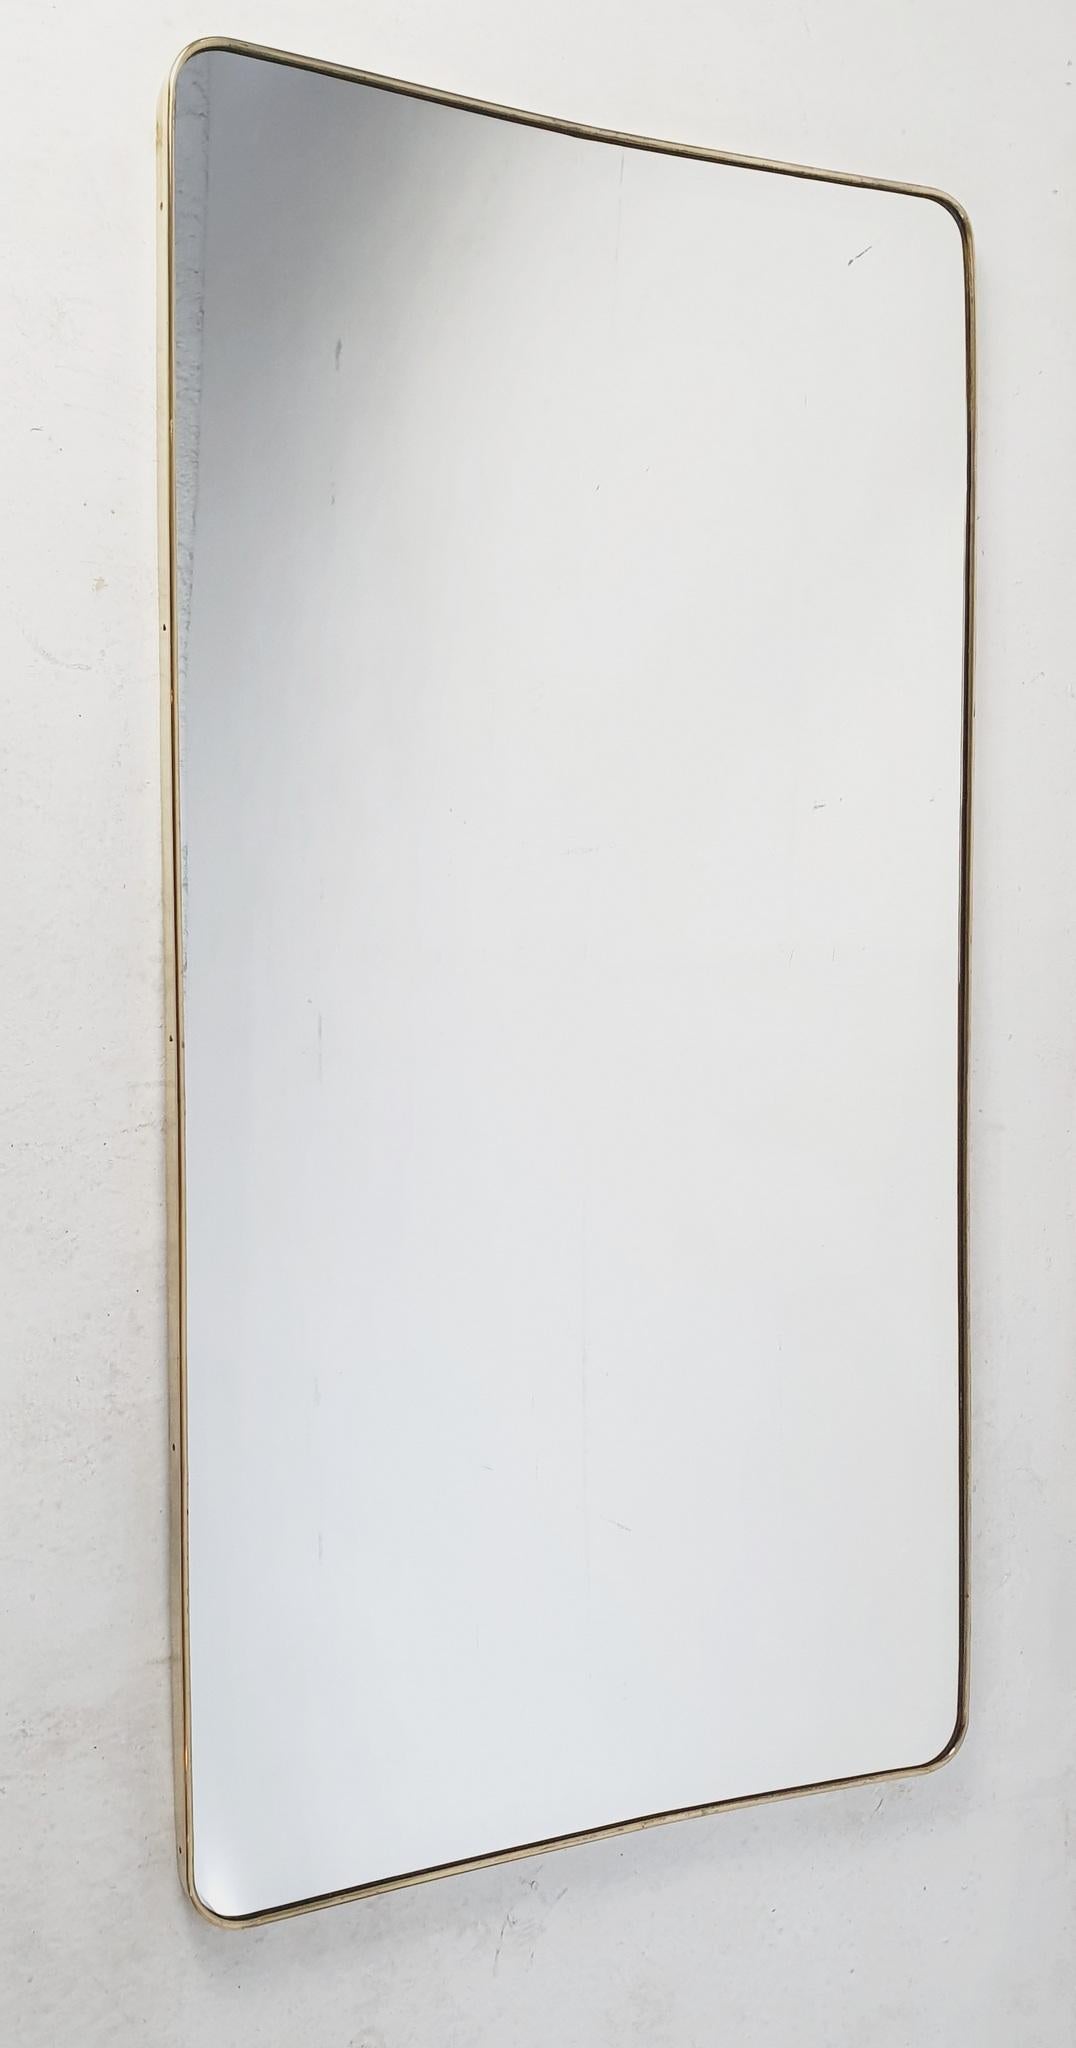 A full lenght wall mirror in the manner by Gio Ponti from the 1950's in brass with rounded corners and lightly beveled top and bottom. The glass is new and in perfect condition. Can be hung vertically or horizontally.